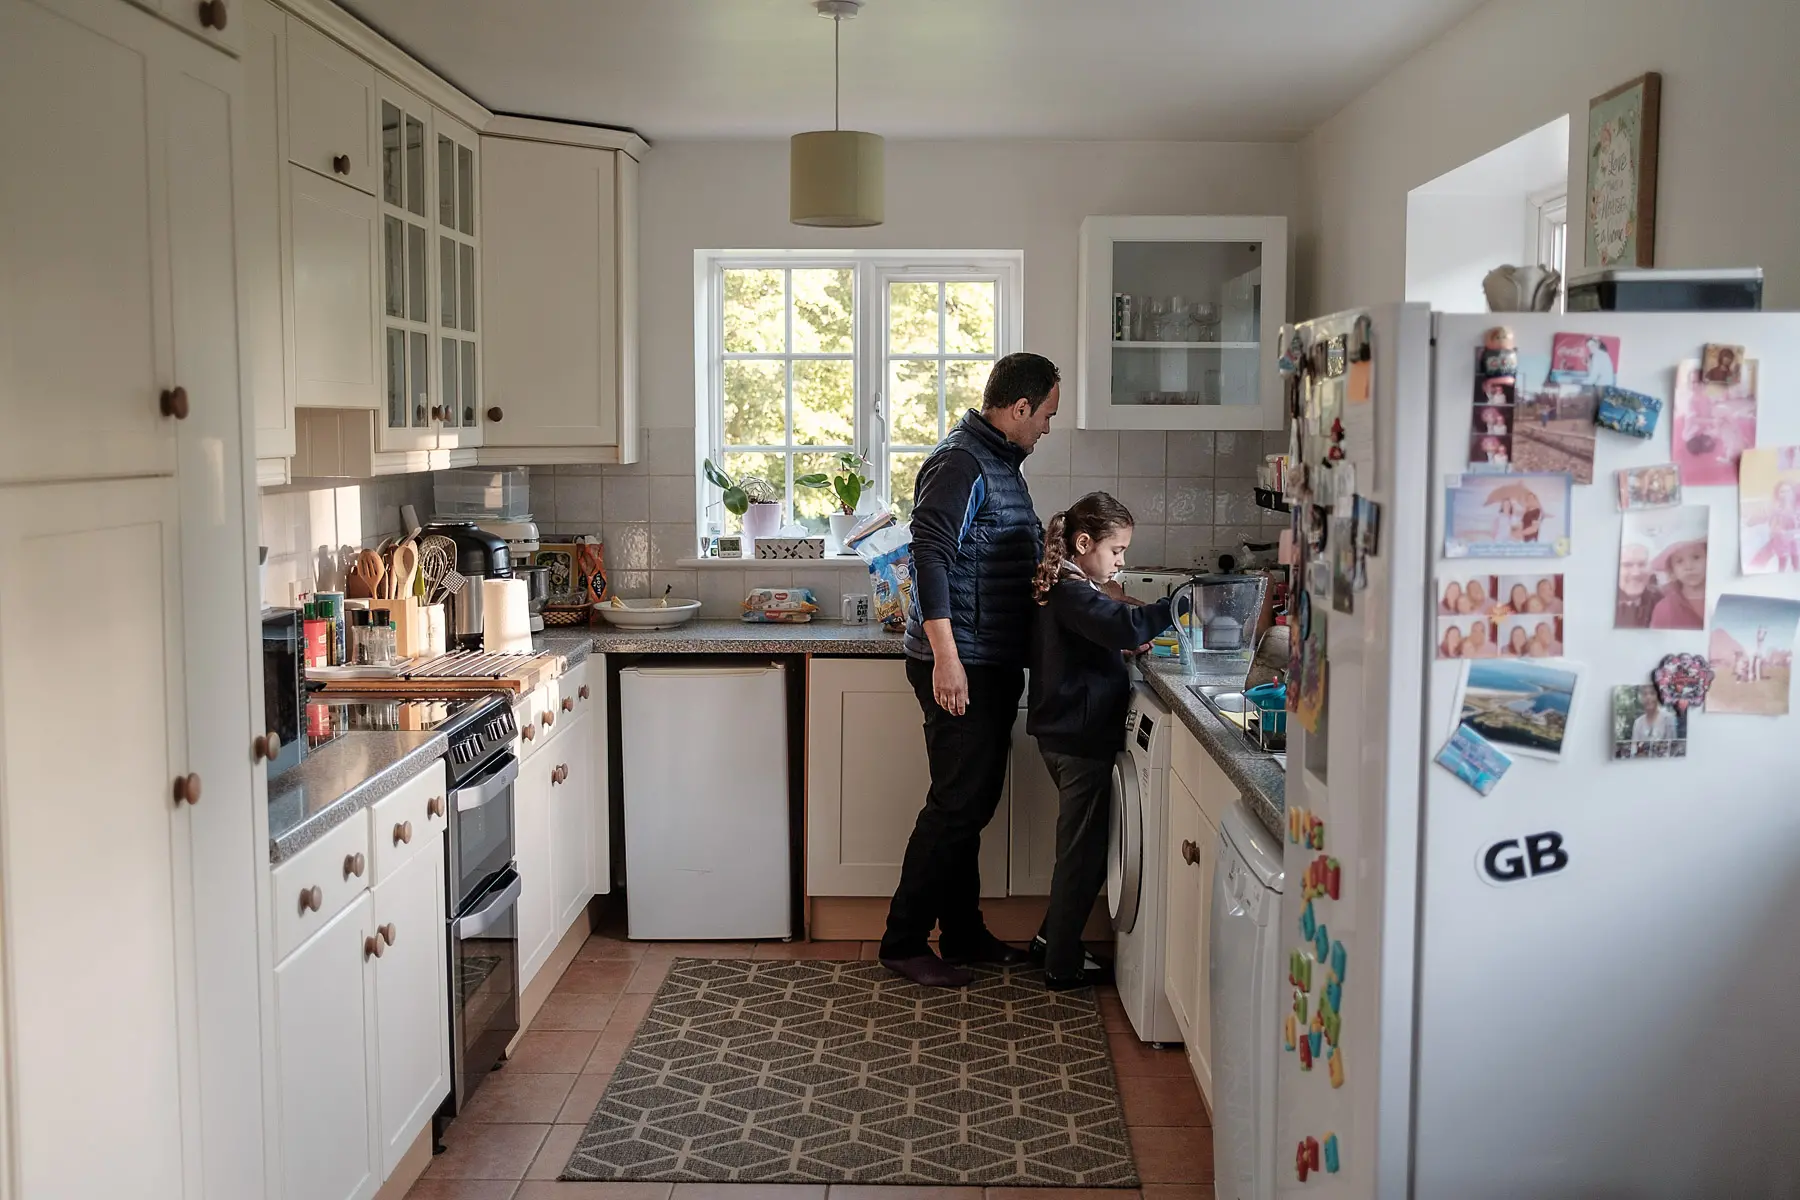 A dad and daughter cook together in kitchen